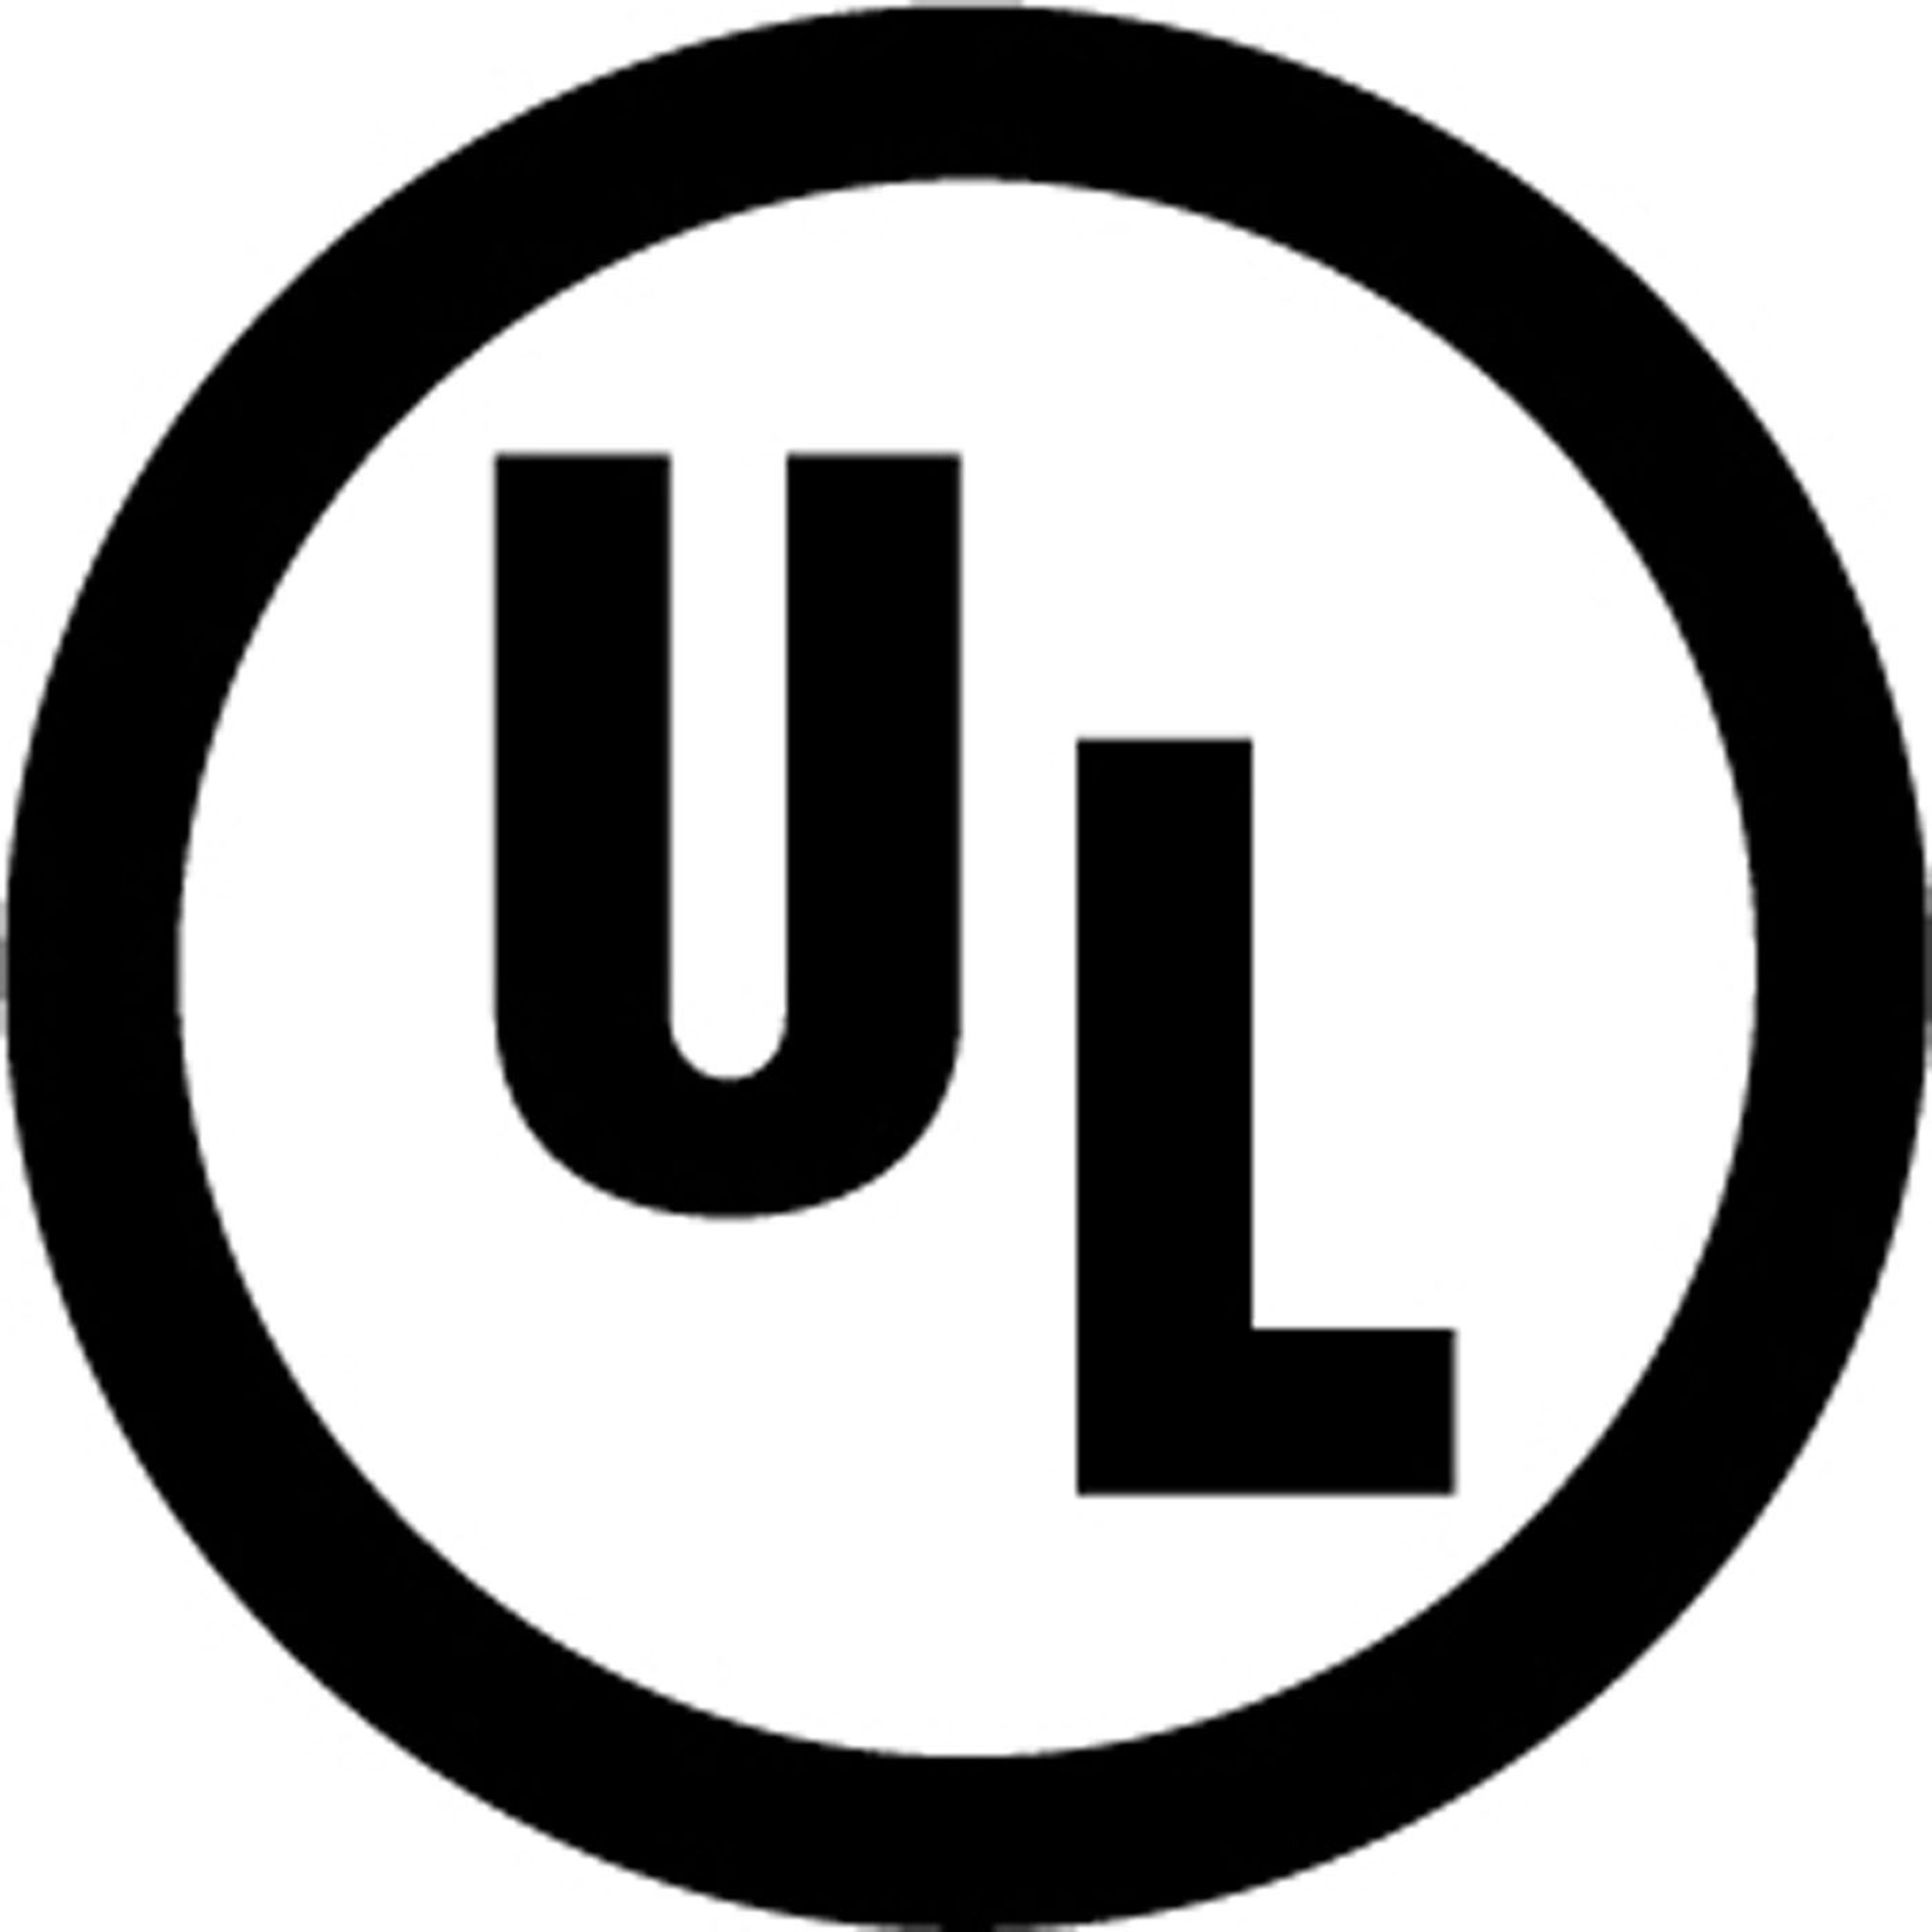 UL and the UL logo are trademarks of Underwriters Laboratories, Inc. (C) 2012.